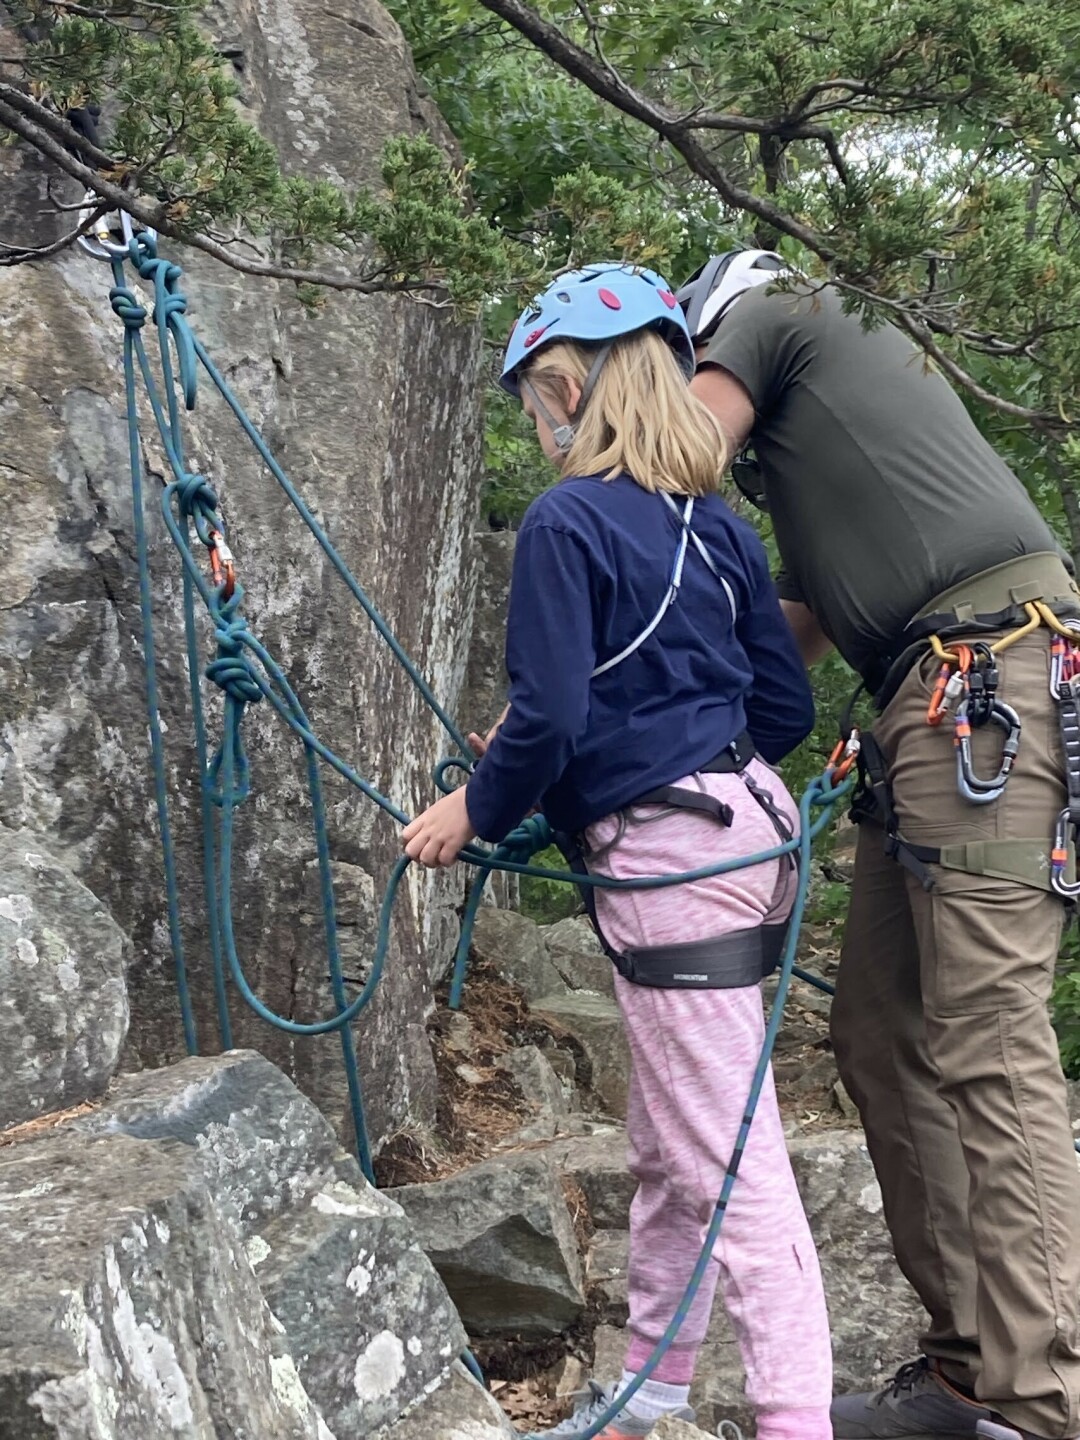 START 'EM YOUNG. Midwest Mountain Guides now offers kids courses for ages 10-13 and 14-17.